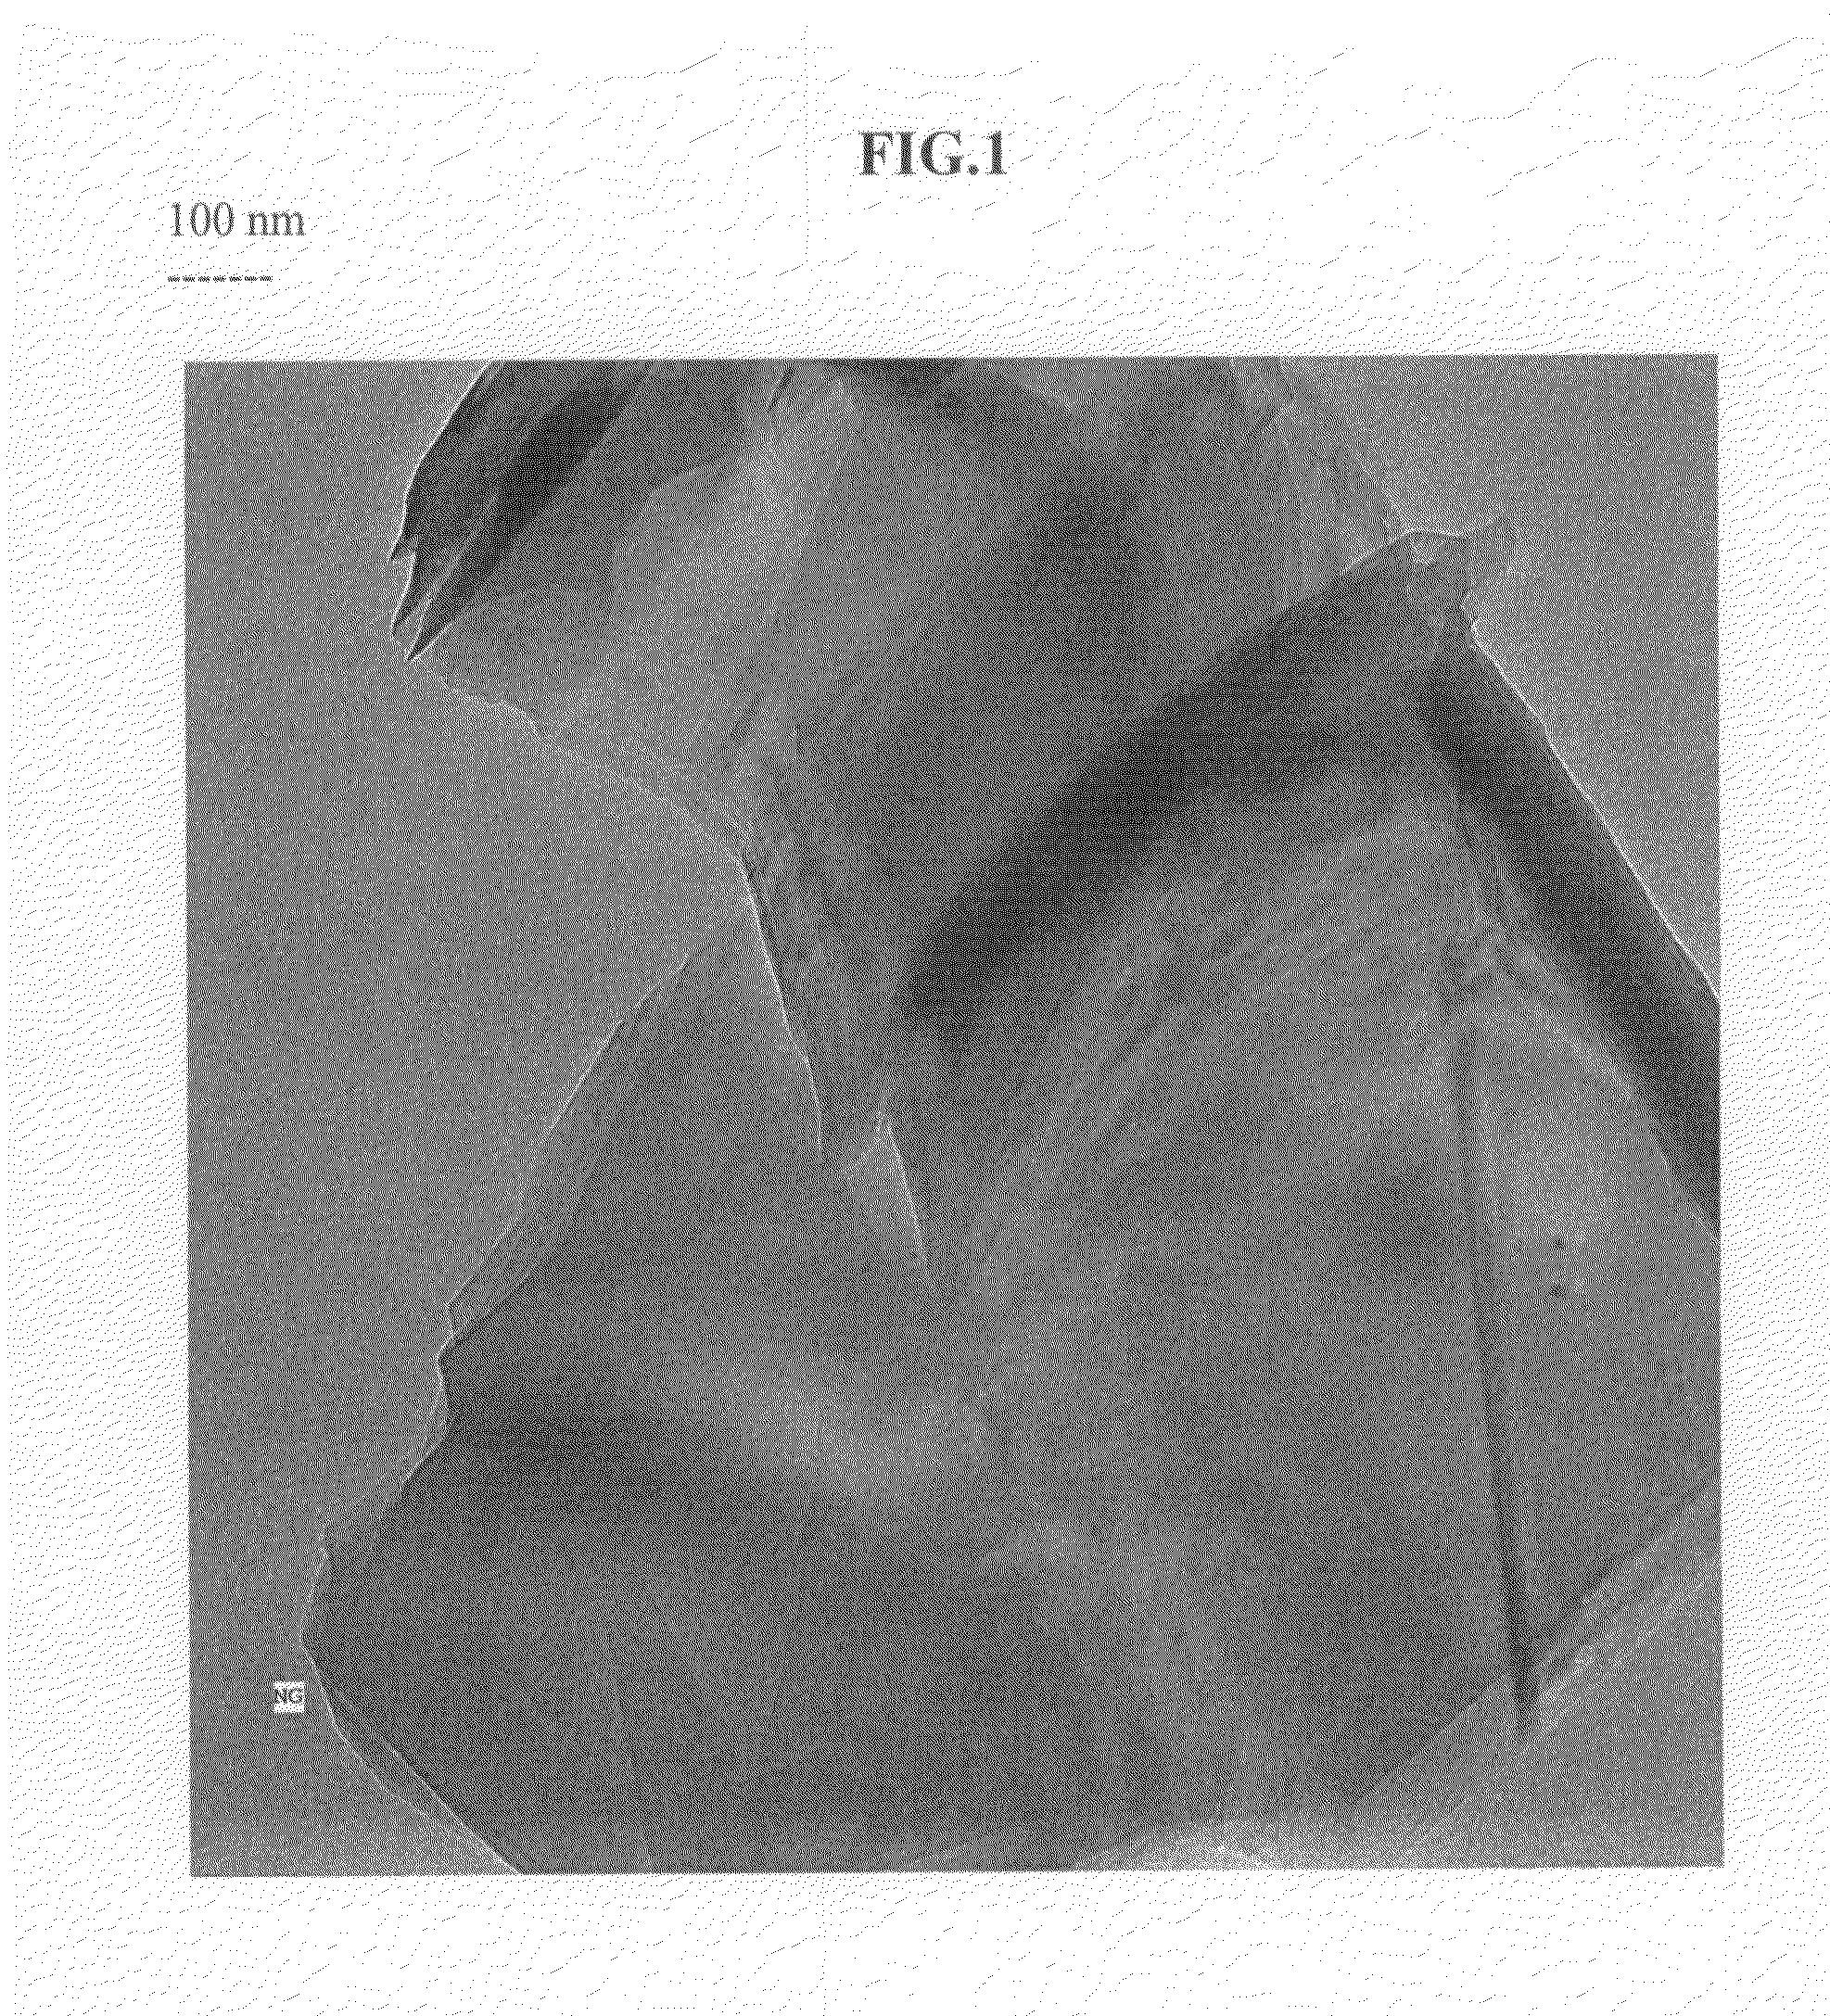 Method of producing exfoliated graphite, flexible graphite, and nano-scaled graphene platelets